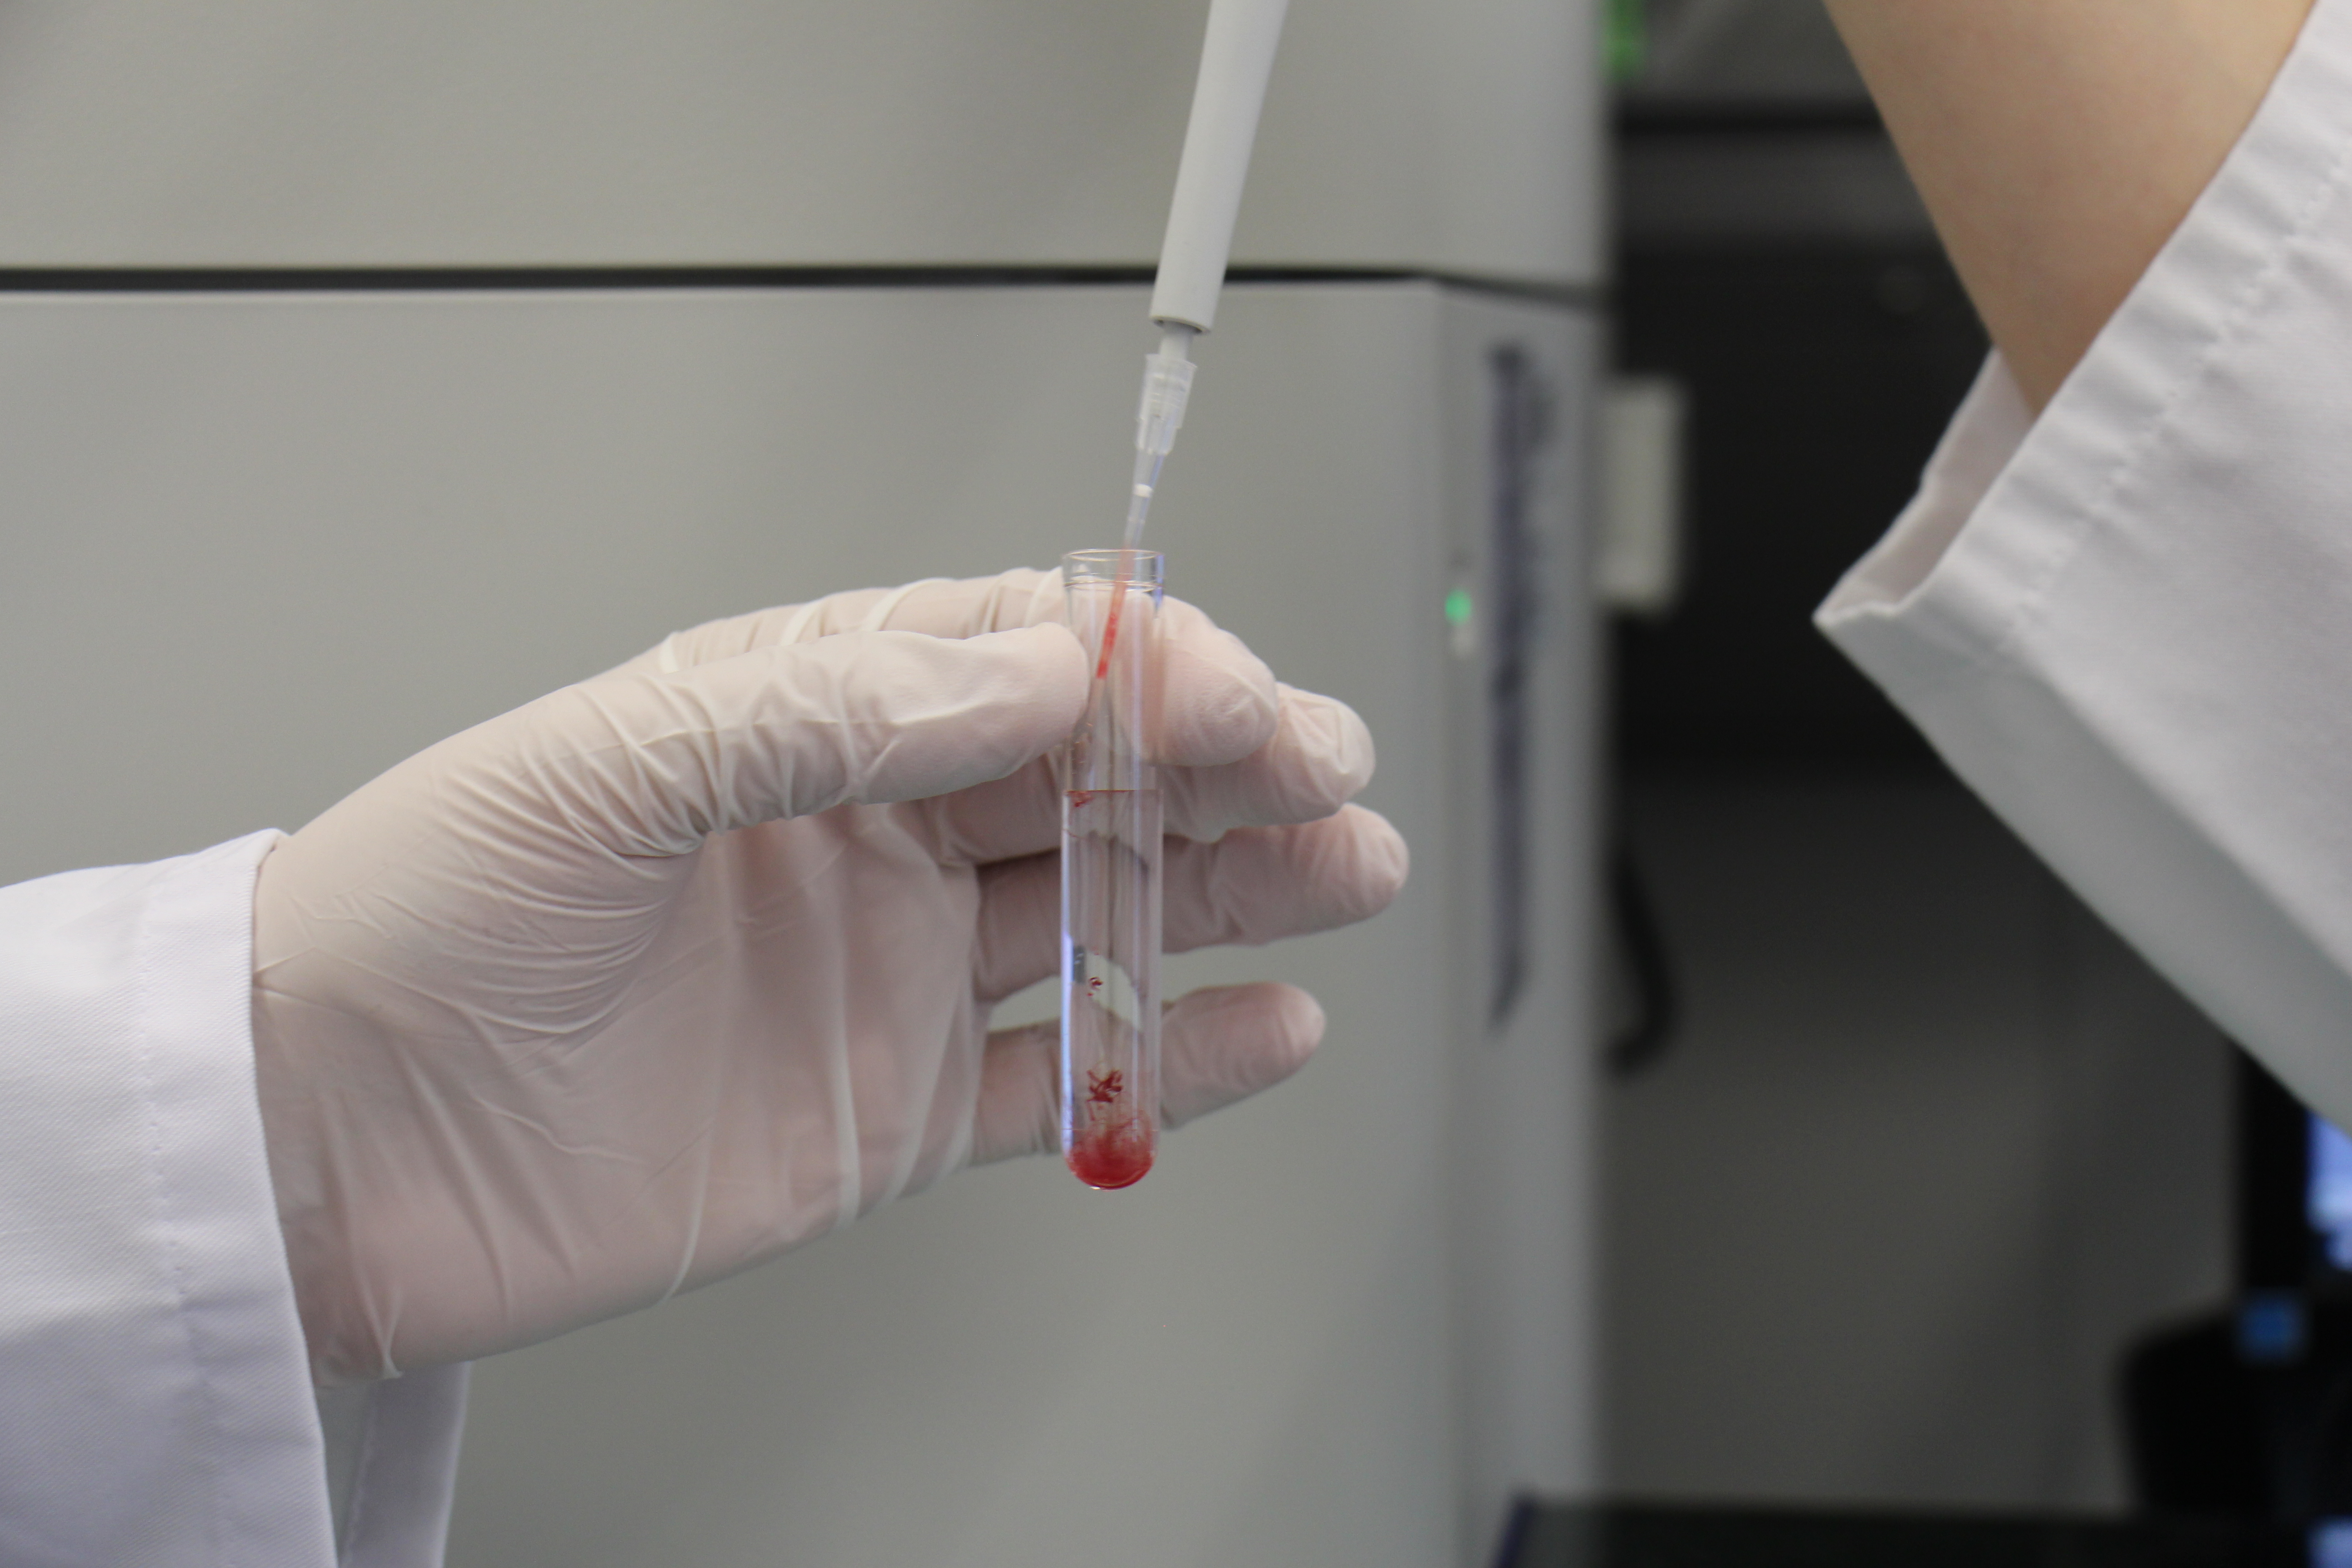 A hand with a disposable glove pipetting blood into a glass tube.